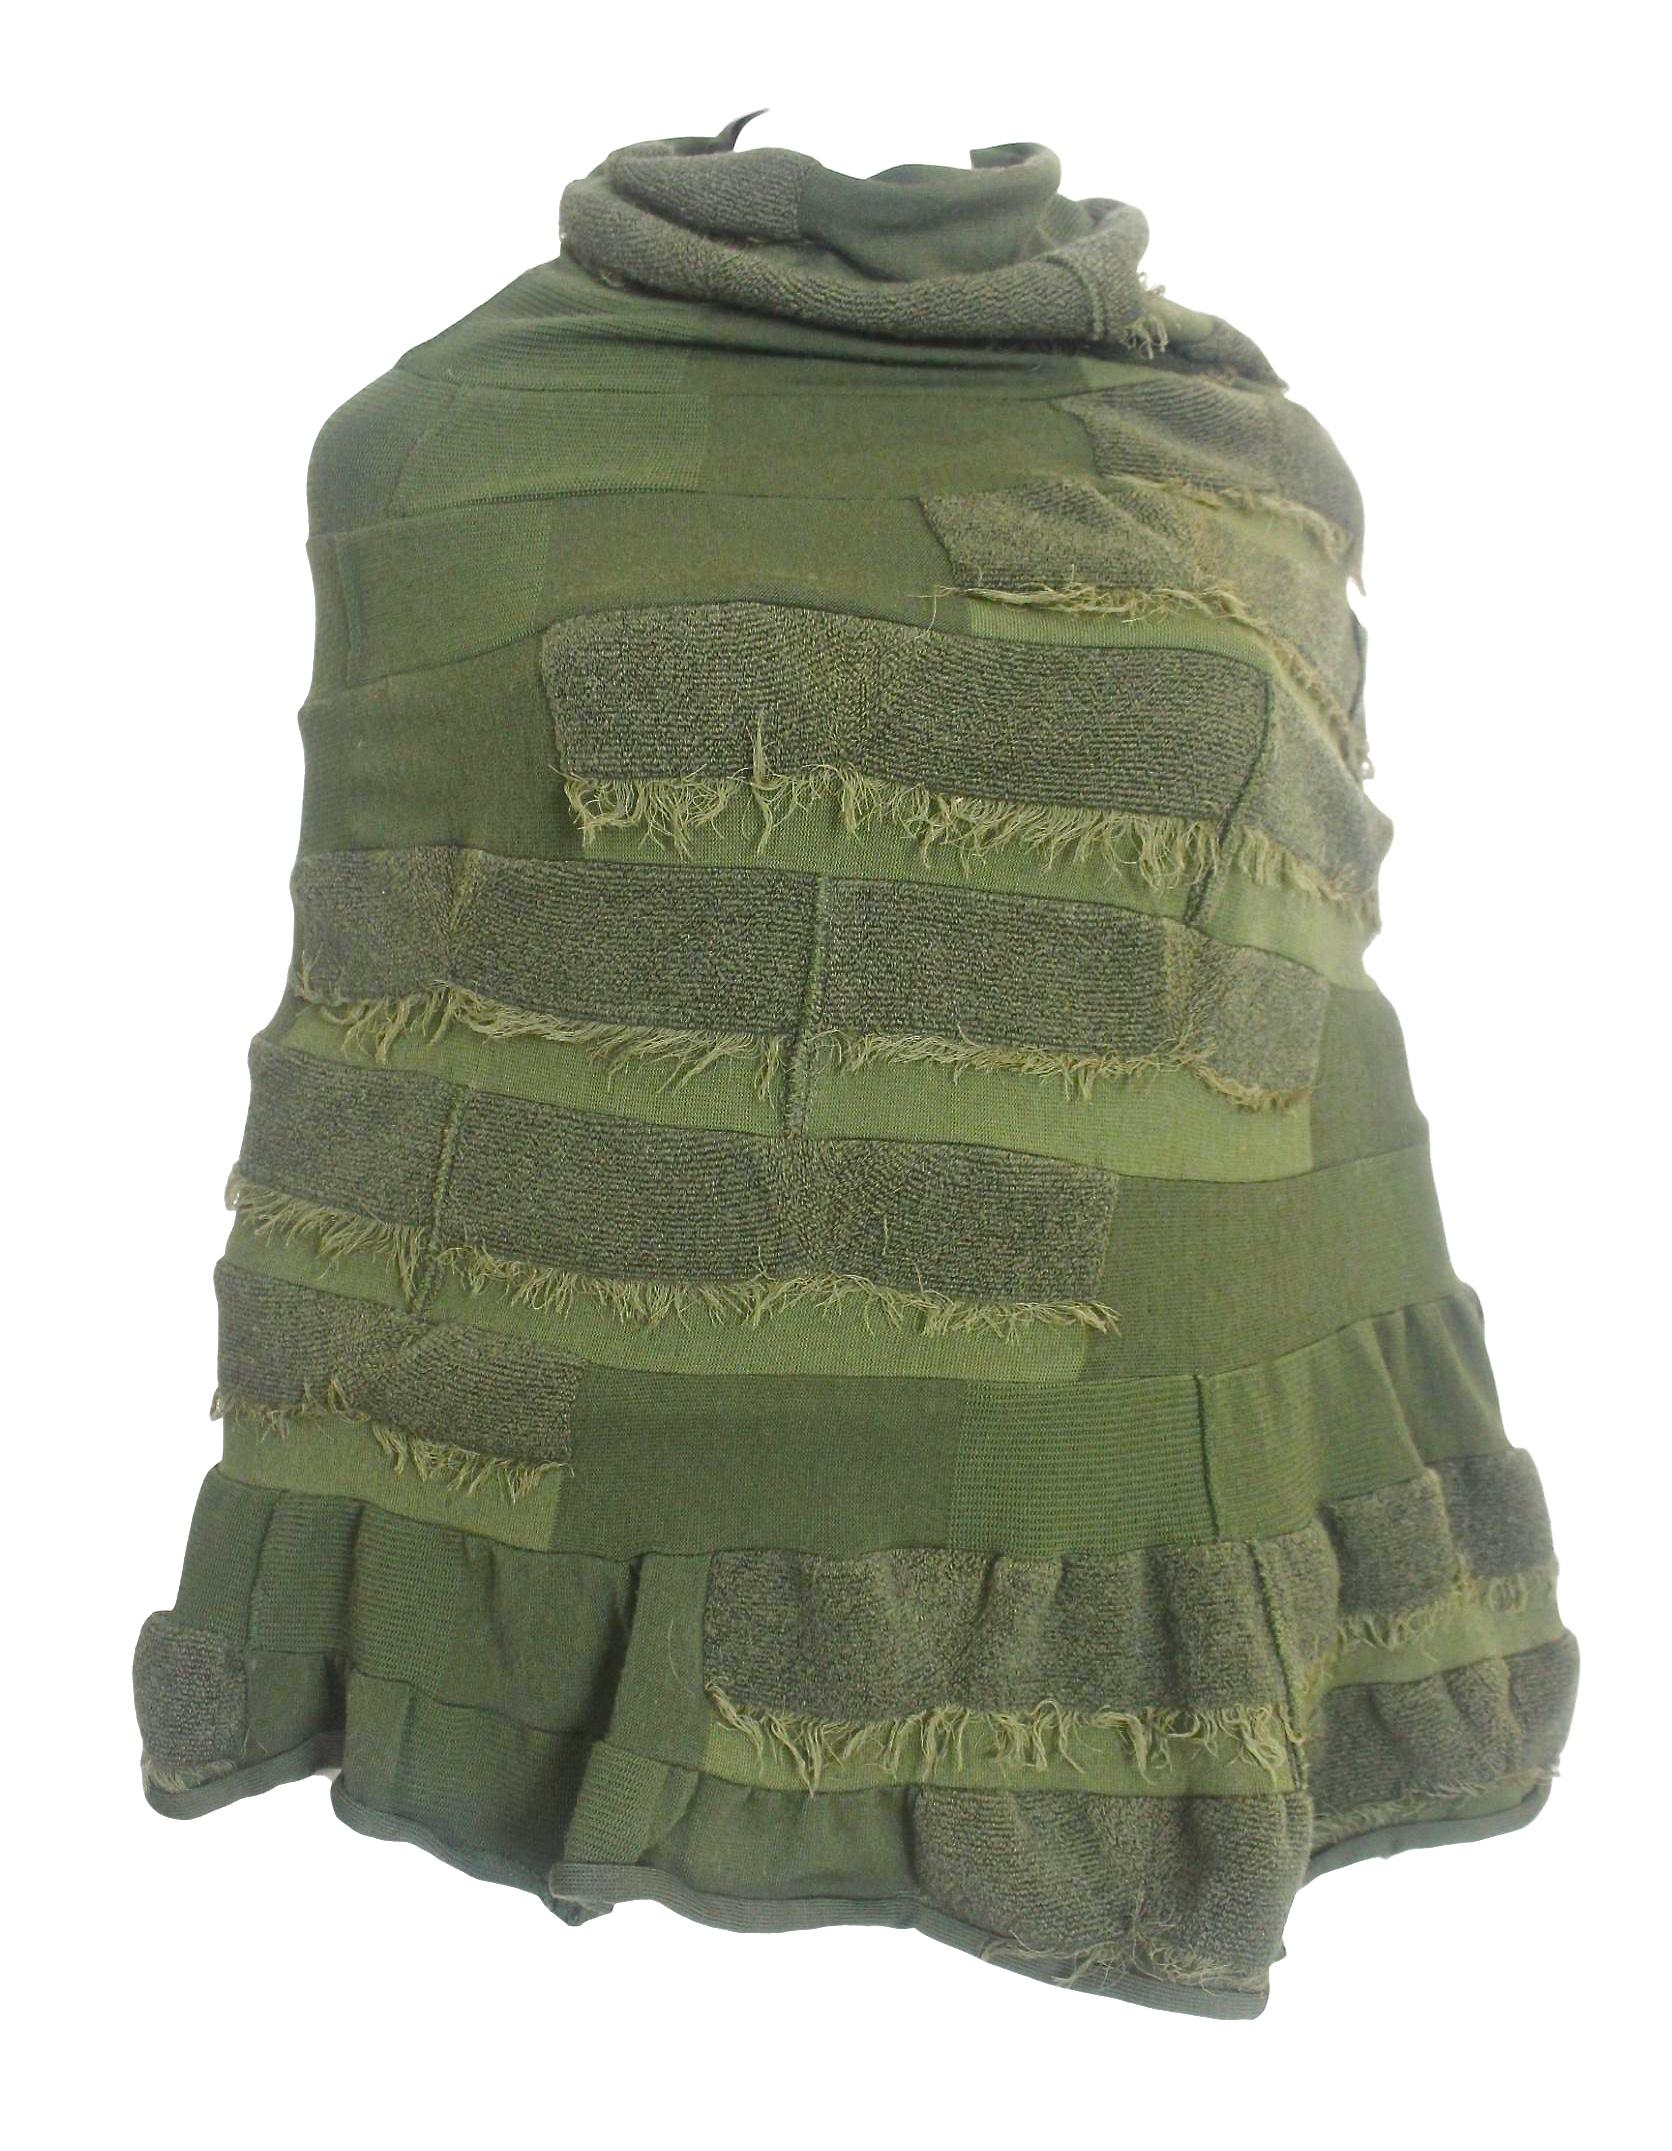 Comme des Garçons Junya Watanabe 2006 Collection Military Knitted Poncho 14